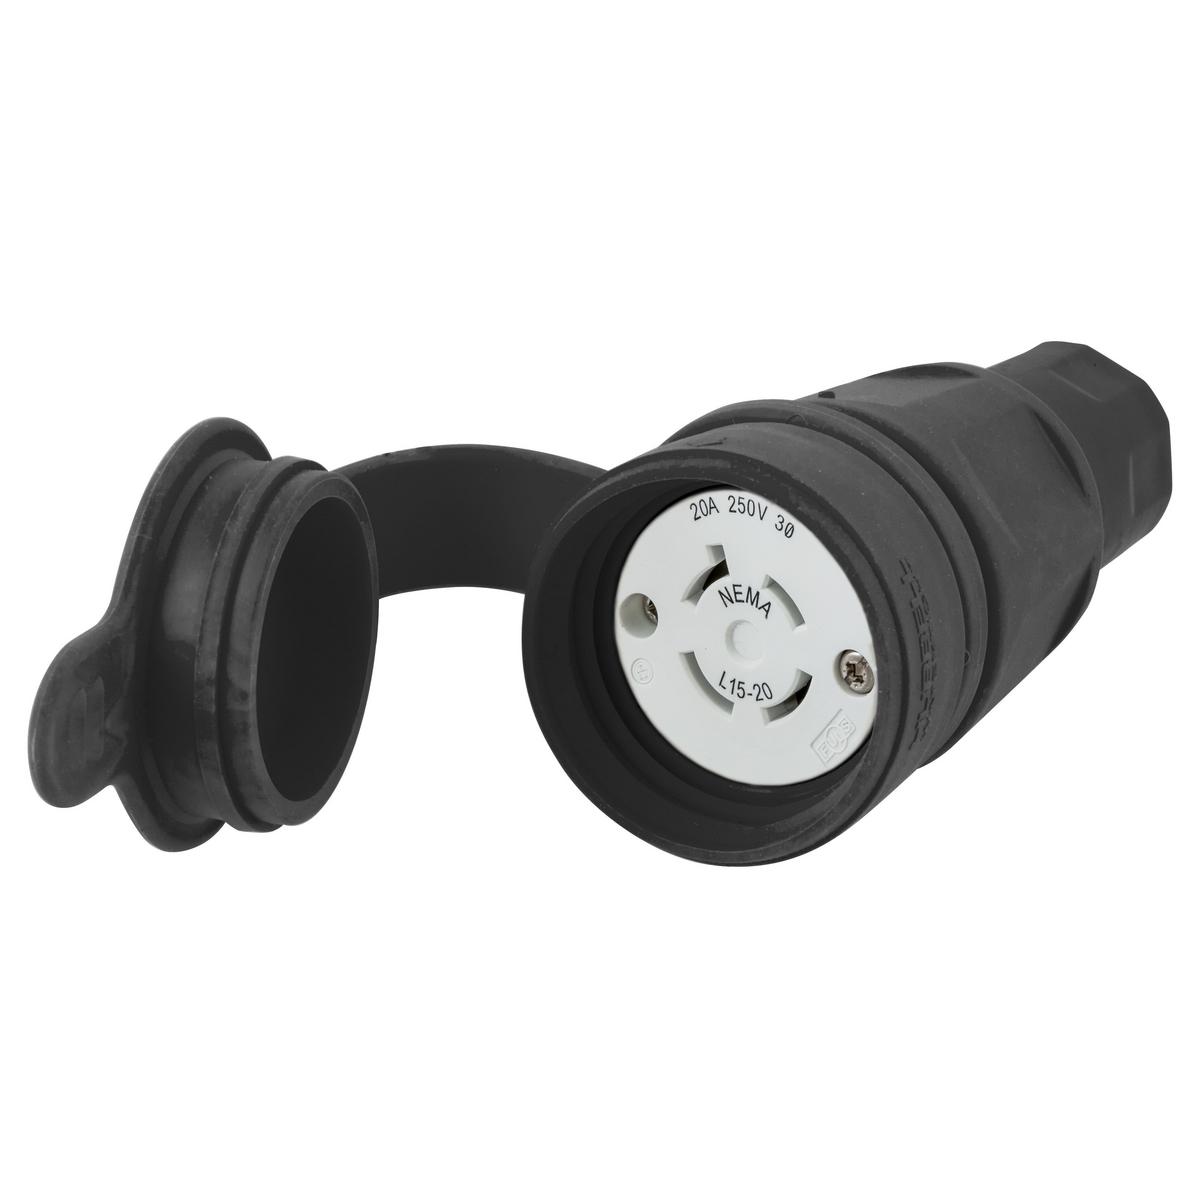 Hubbell HBL27W75BK Watertight Devices, Twist-Lock® Connector, 20A, 3 Phase 250V AC, 3 Pole, 4 Wire, Thermoplastic elastomer, NEMA L15-20R, Black  ; Smooth body design minimizes collection points simplifying the wash down process ; Strain relief nut always seals on the body,